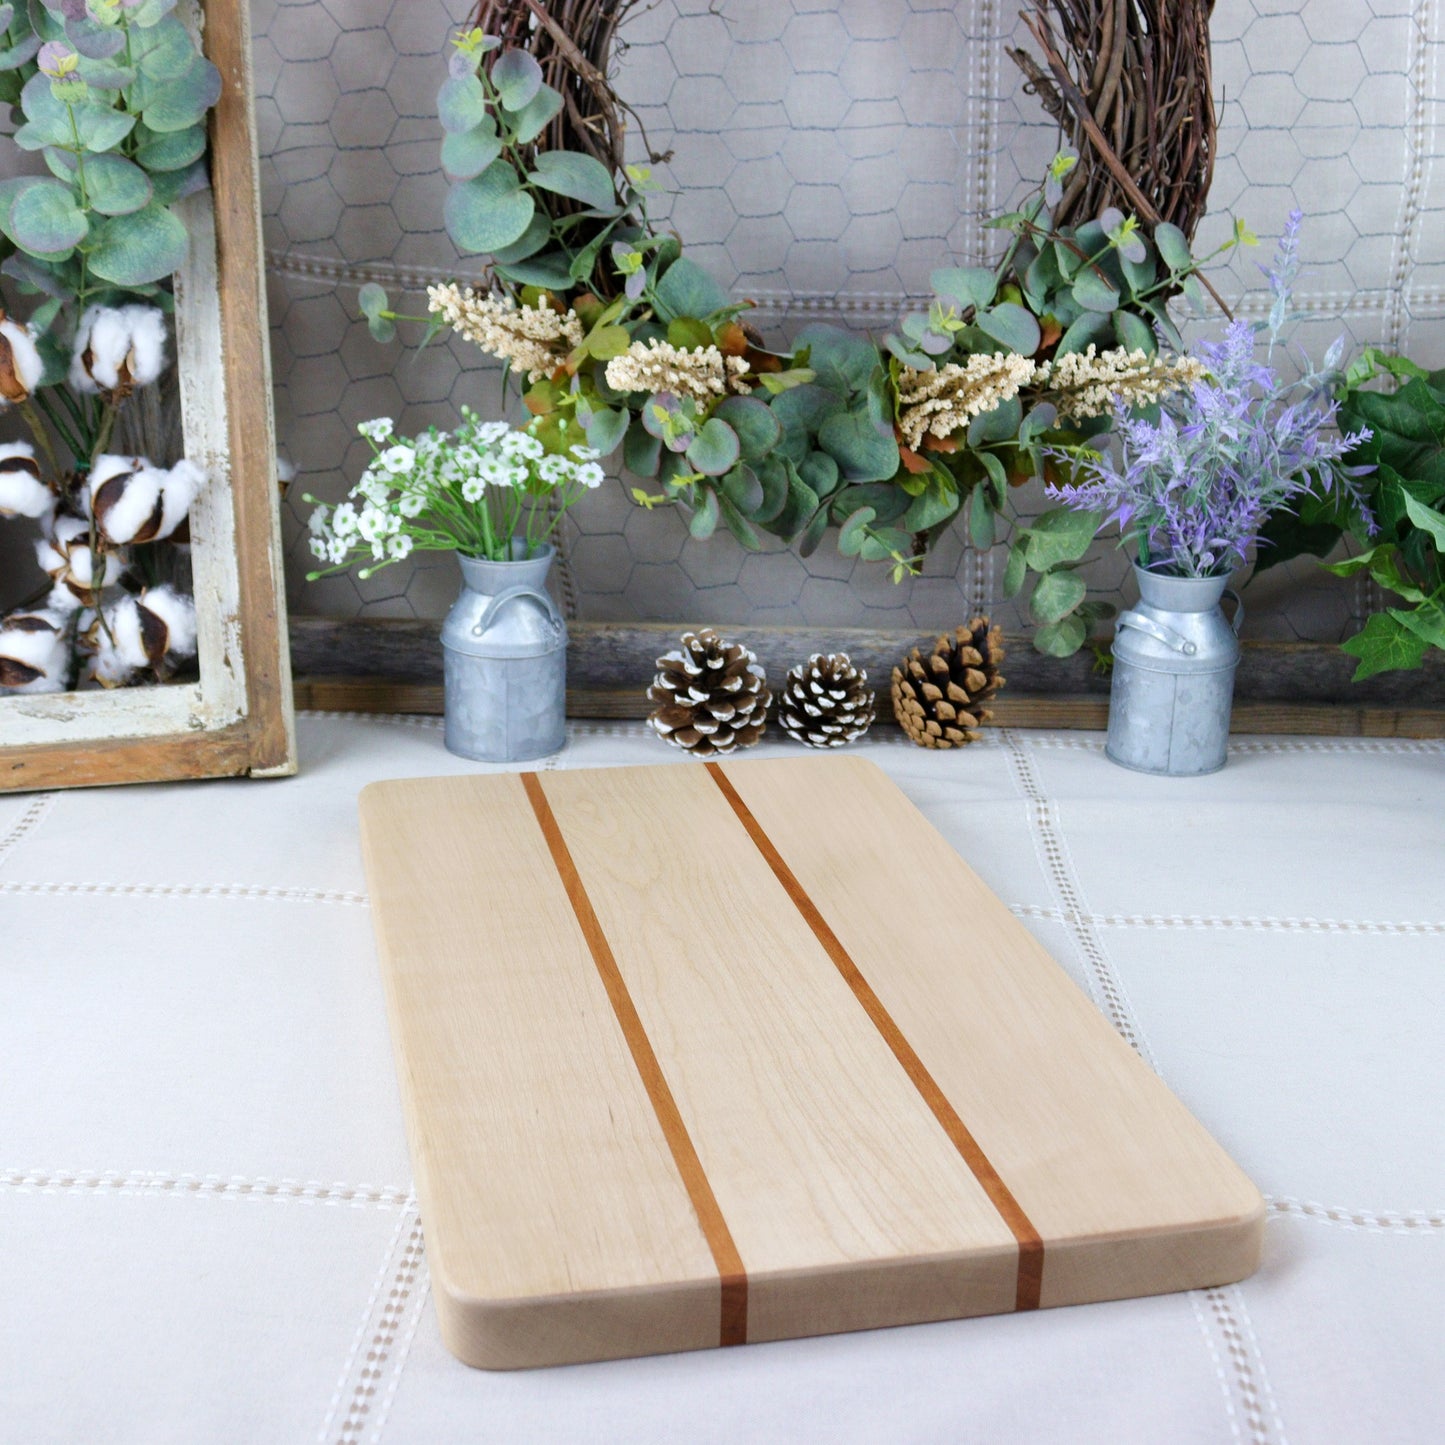 Maple Wood Cutting Board with Offset Cherry Inlay